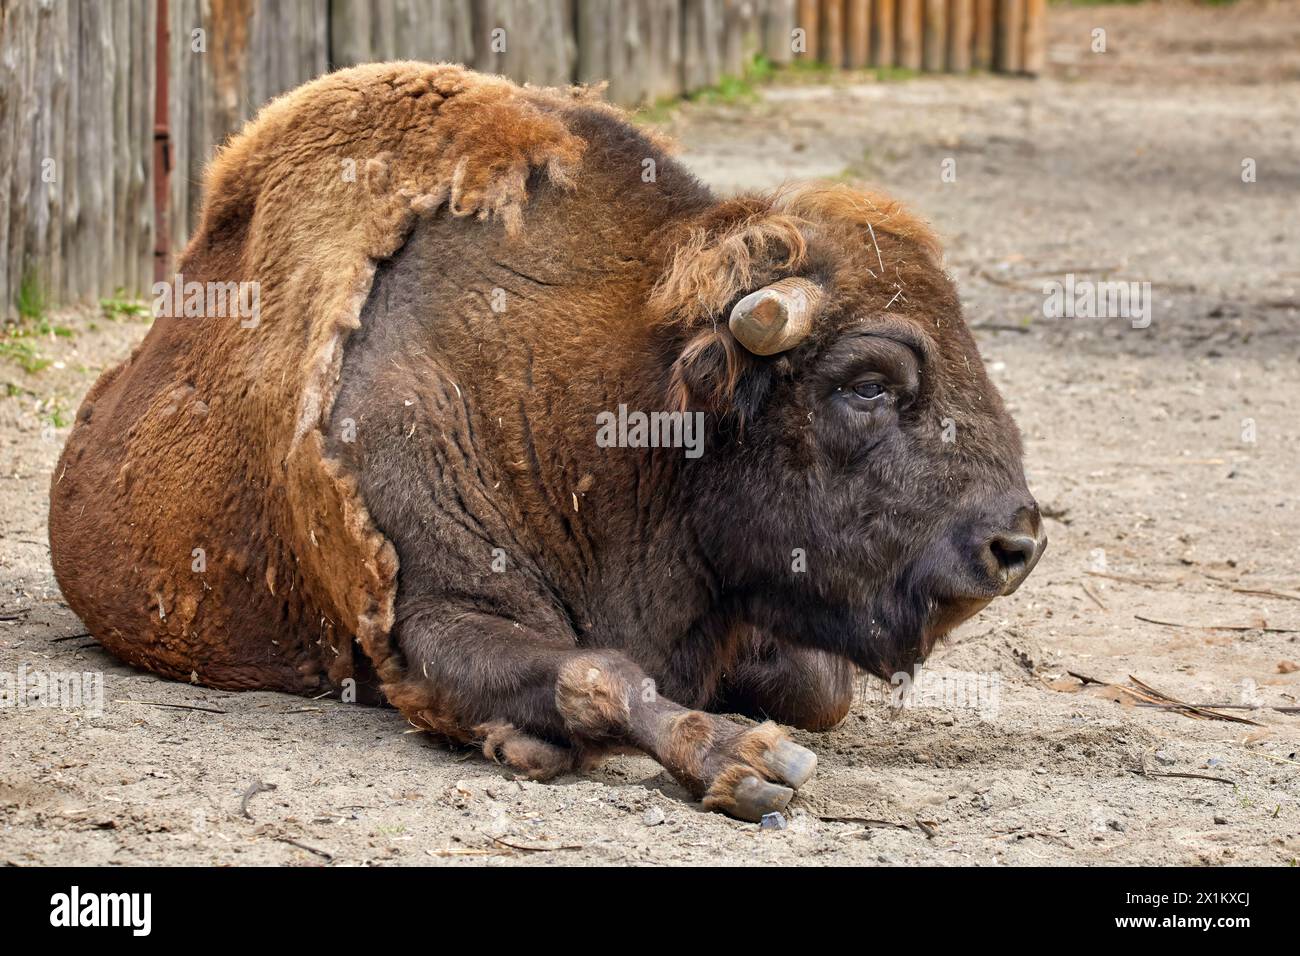 An image of the artiodactyl animal bison lies in a zoo enclosure Stock Photo